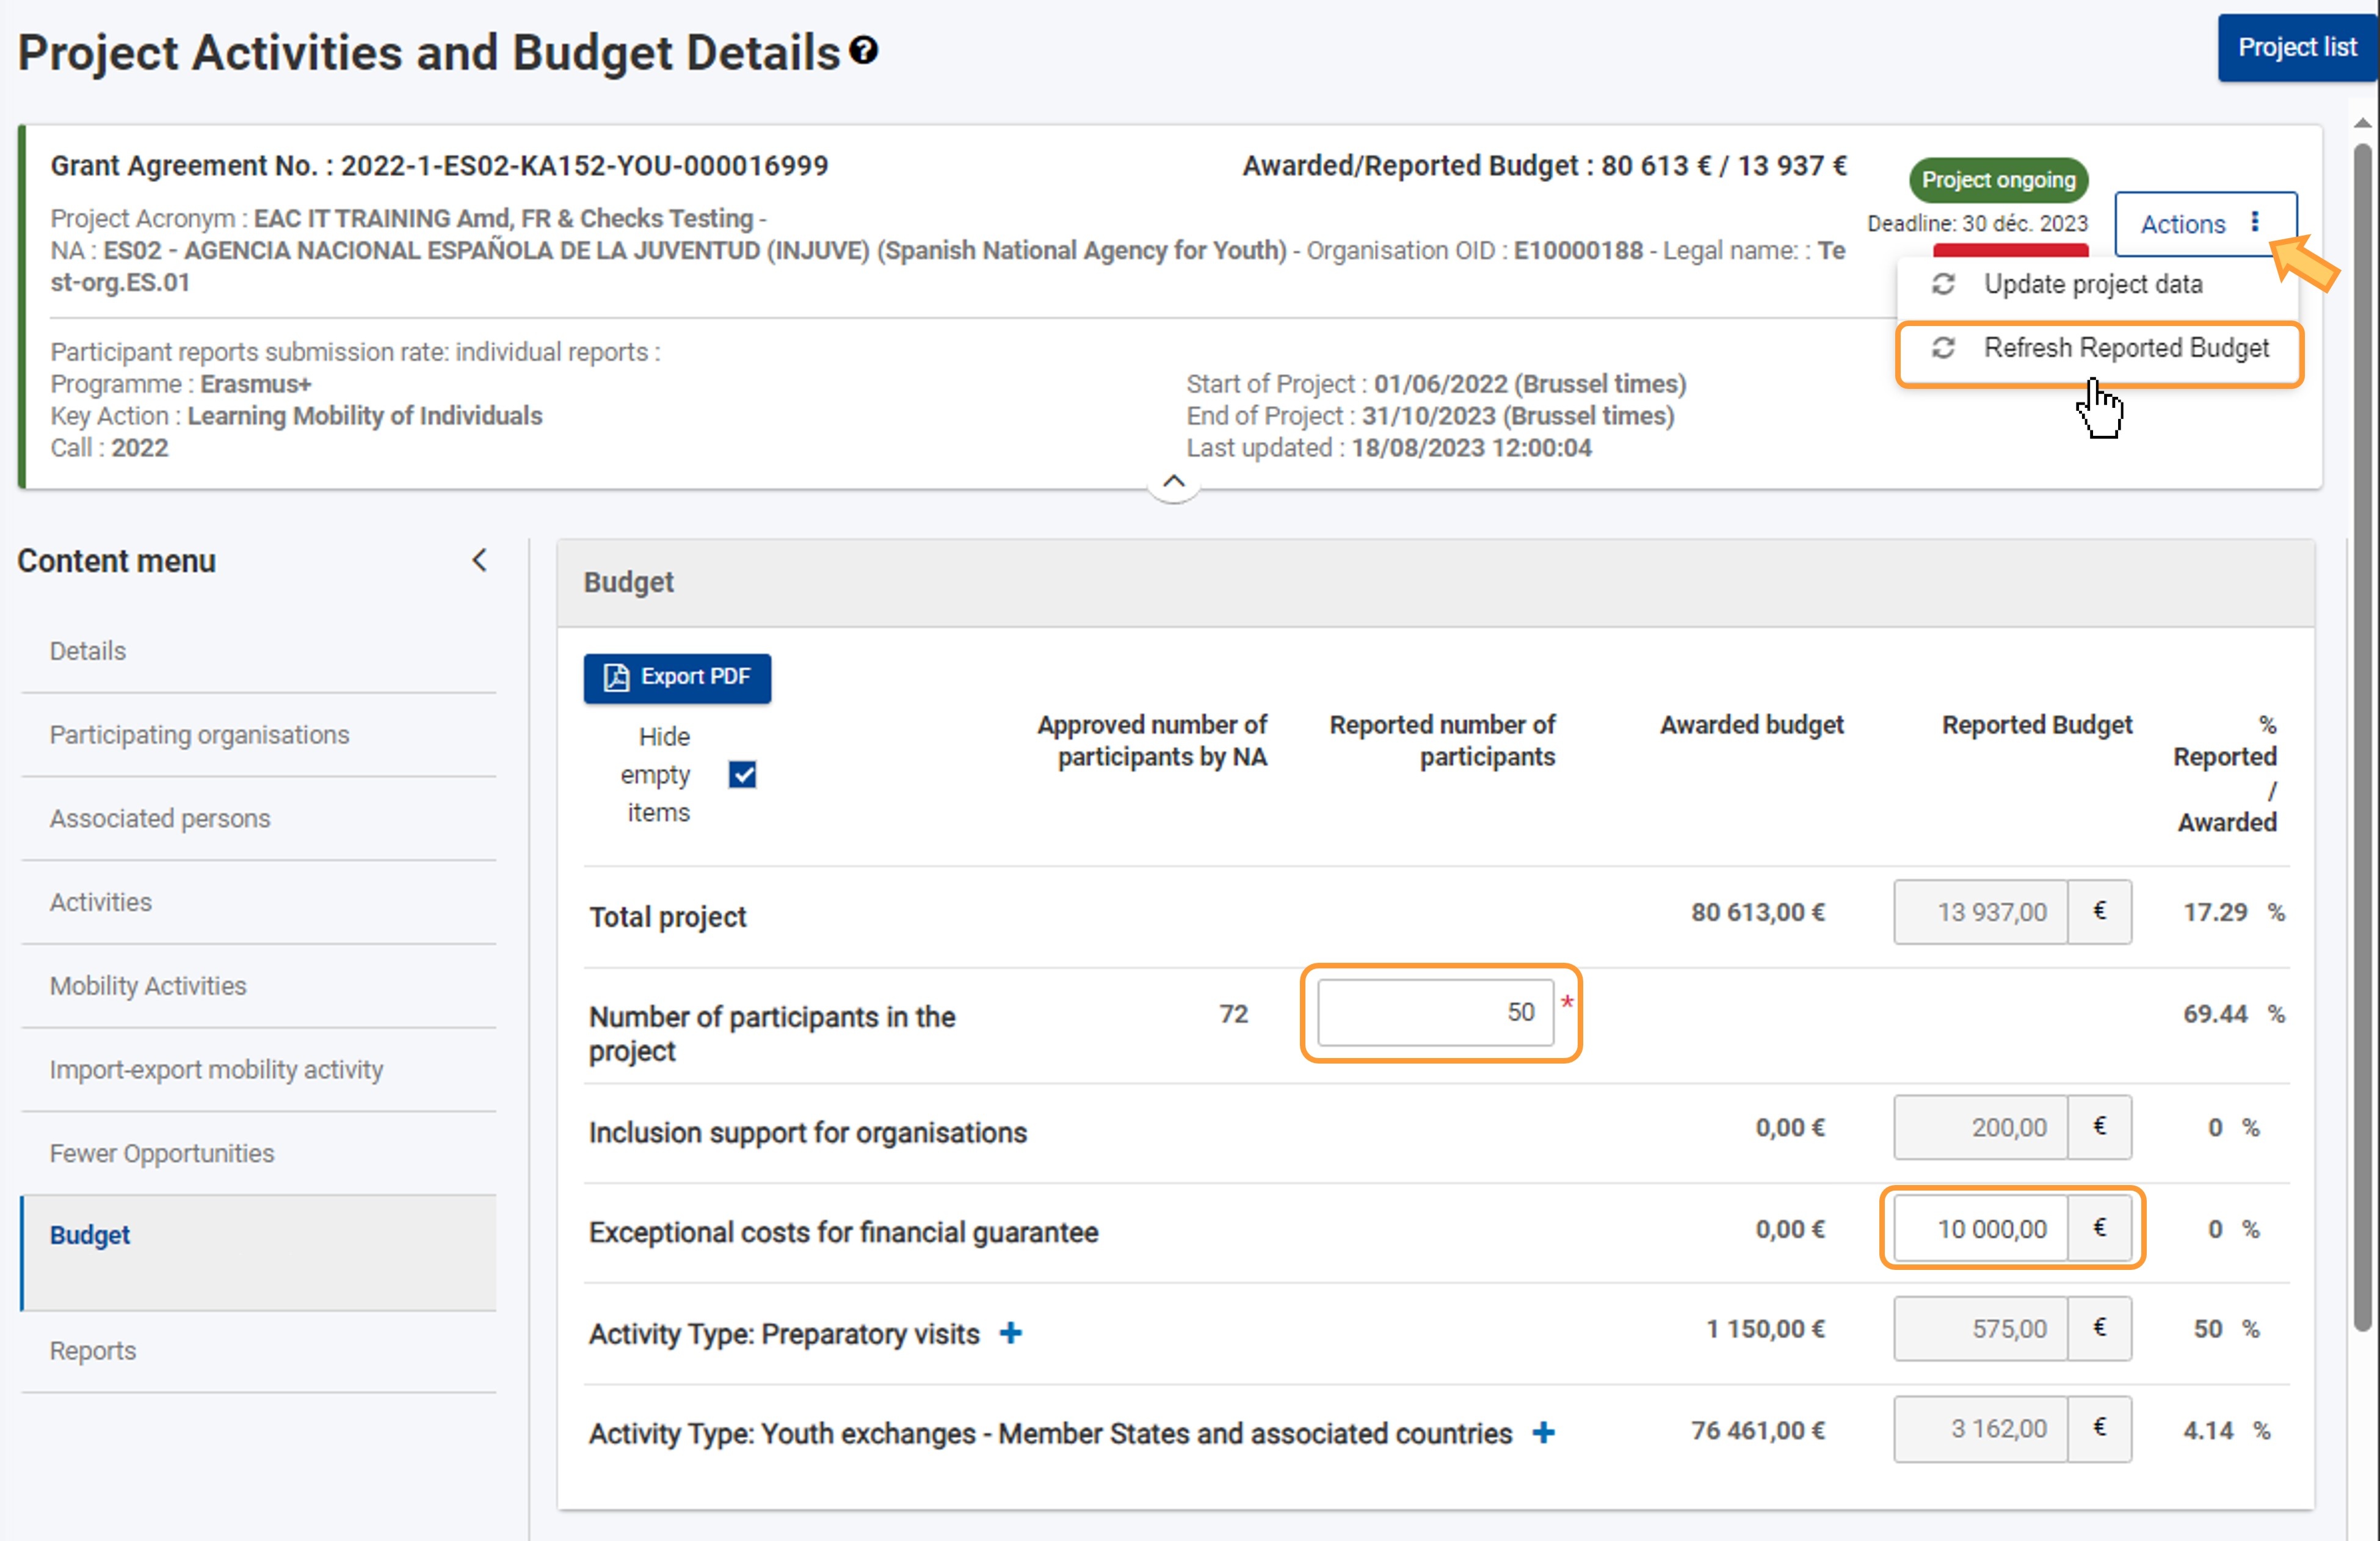 Certain editable fields may be available in the project budget